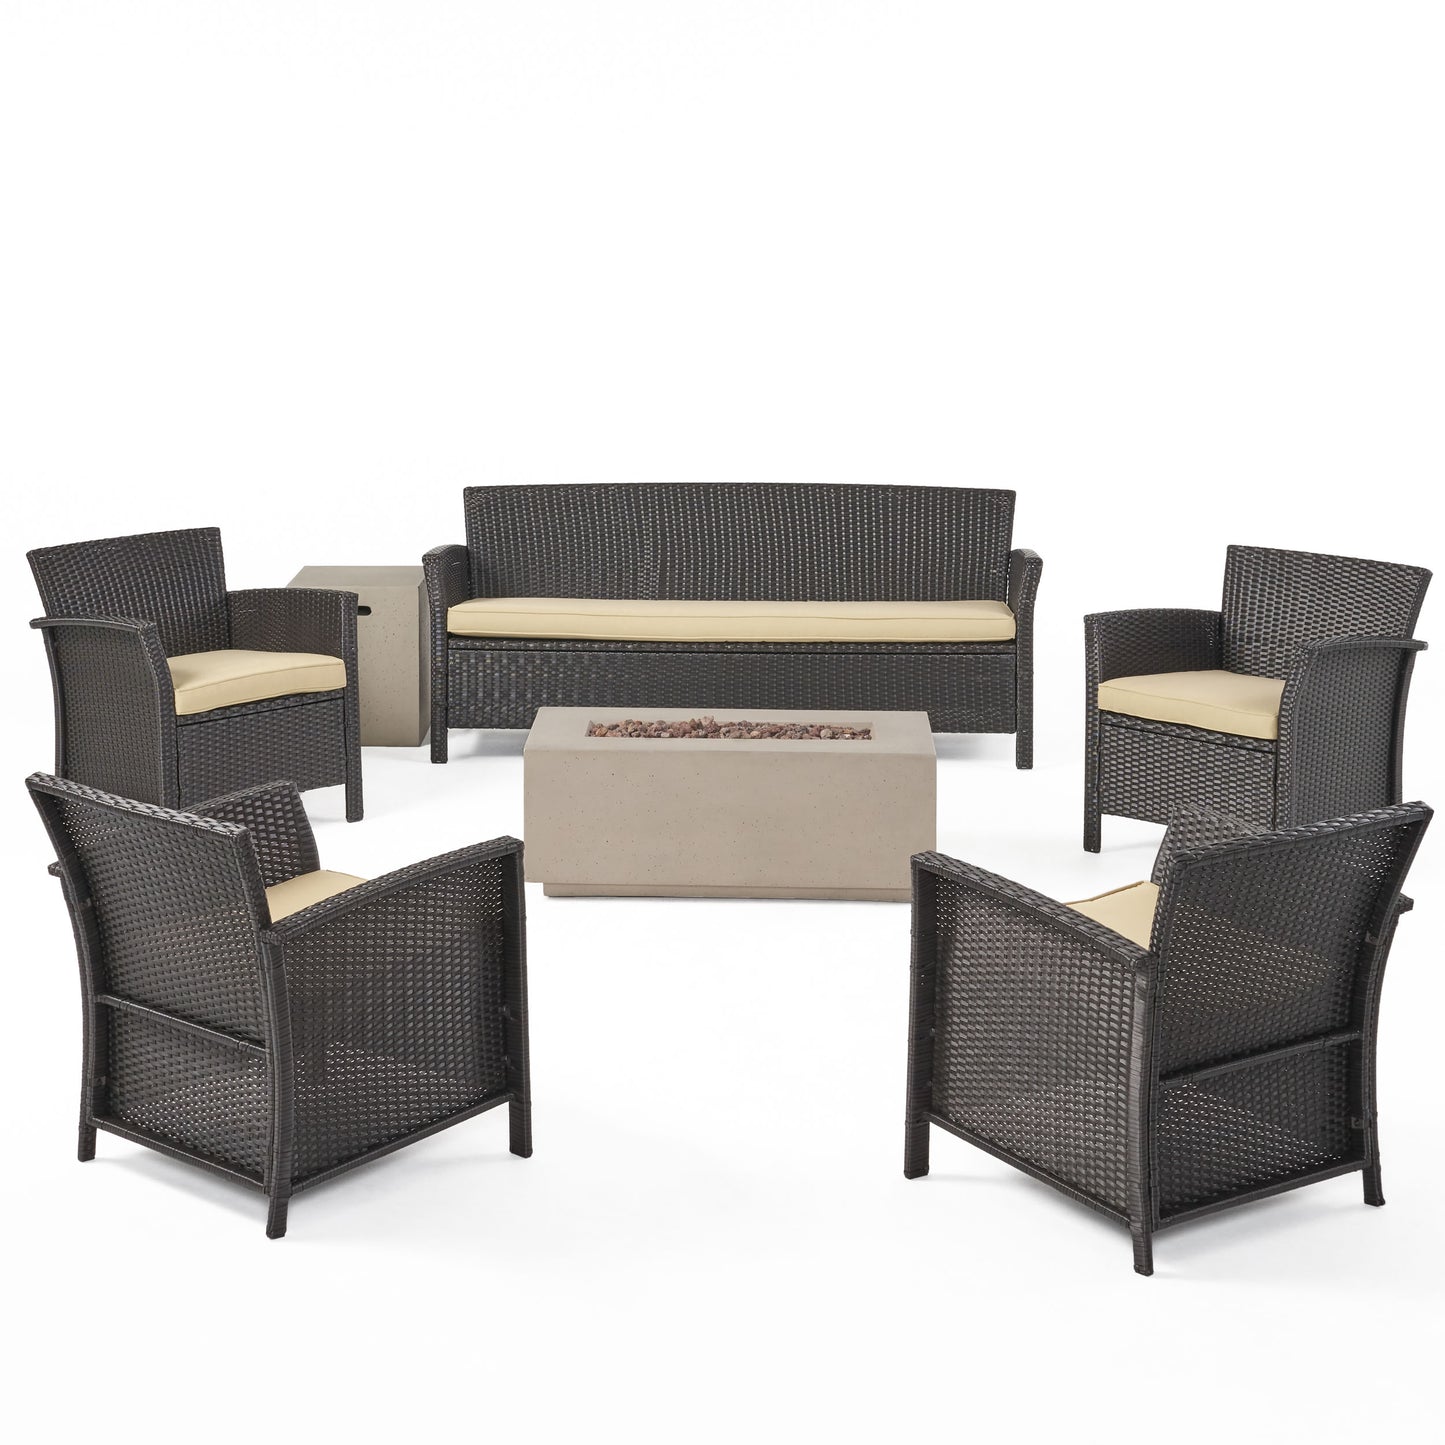 Mason Outdoor 4-Seater Wicker Chat Set with Fire Pit